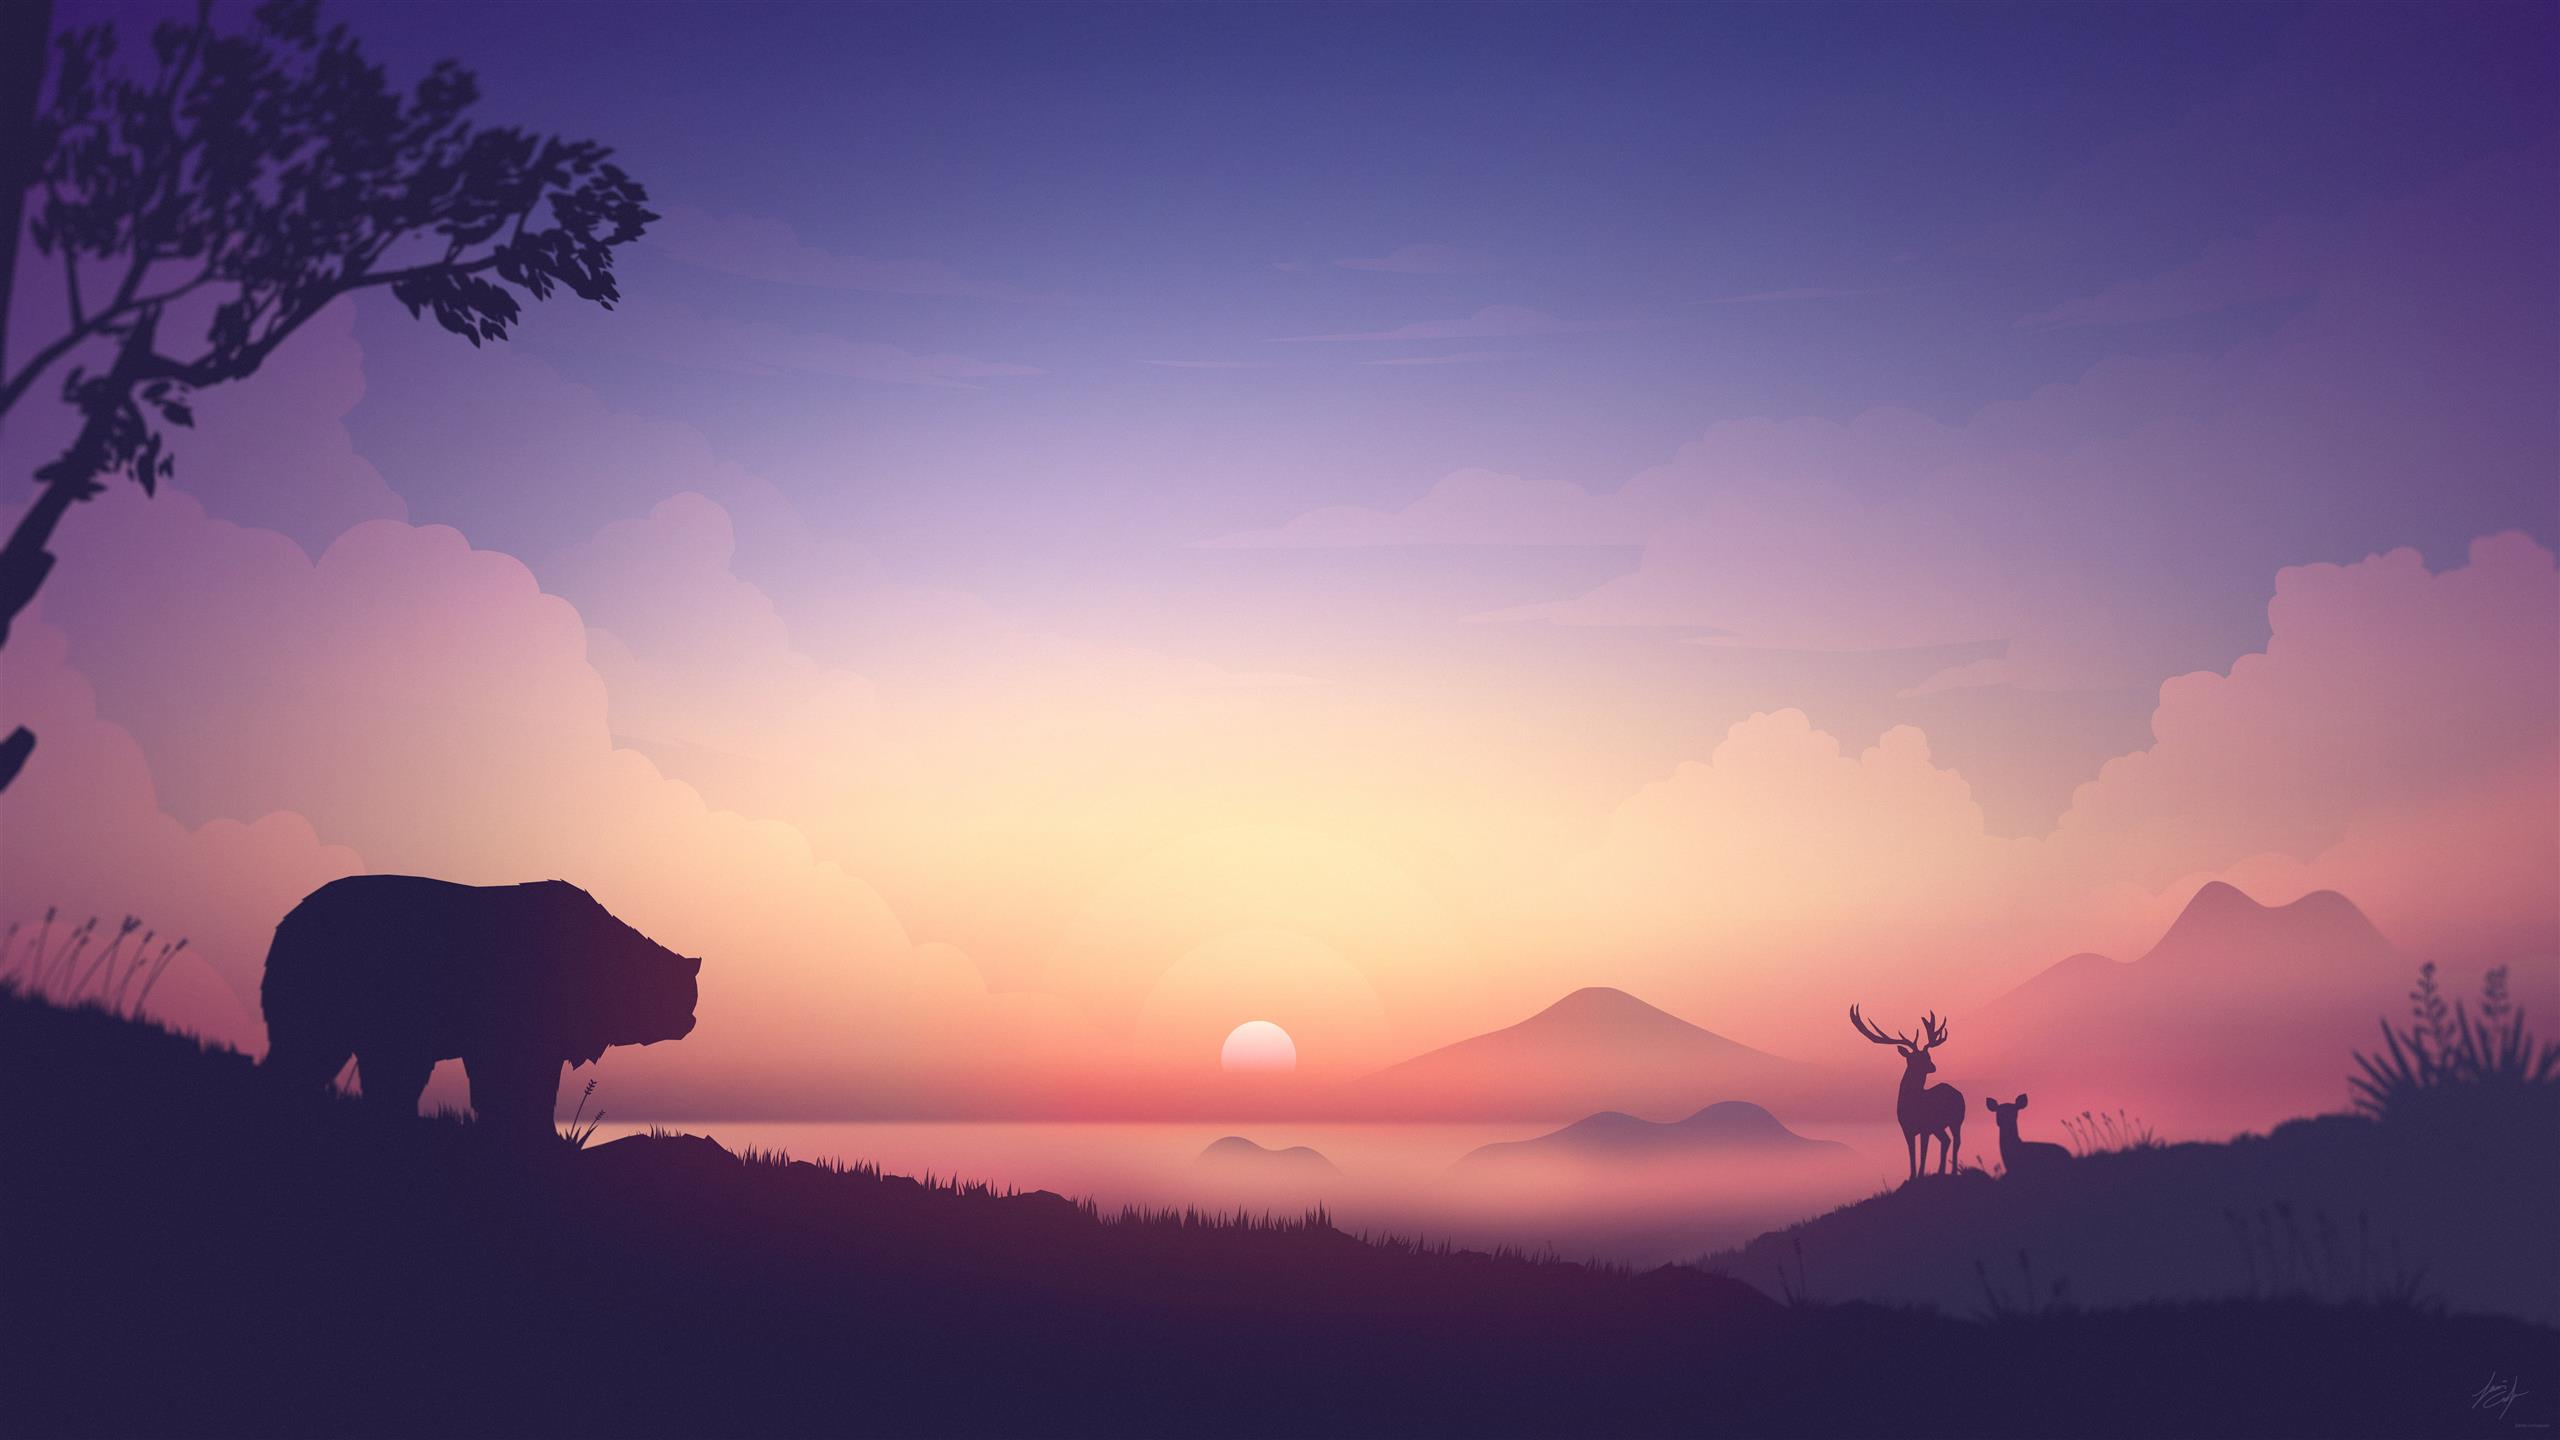 silhouette of bear illustration, silhouette photo of deer and bear under golden hour, HD wallpaper